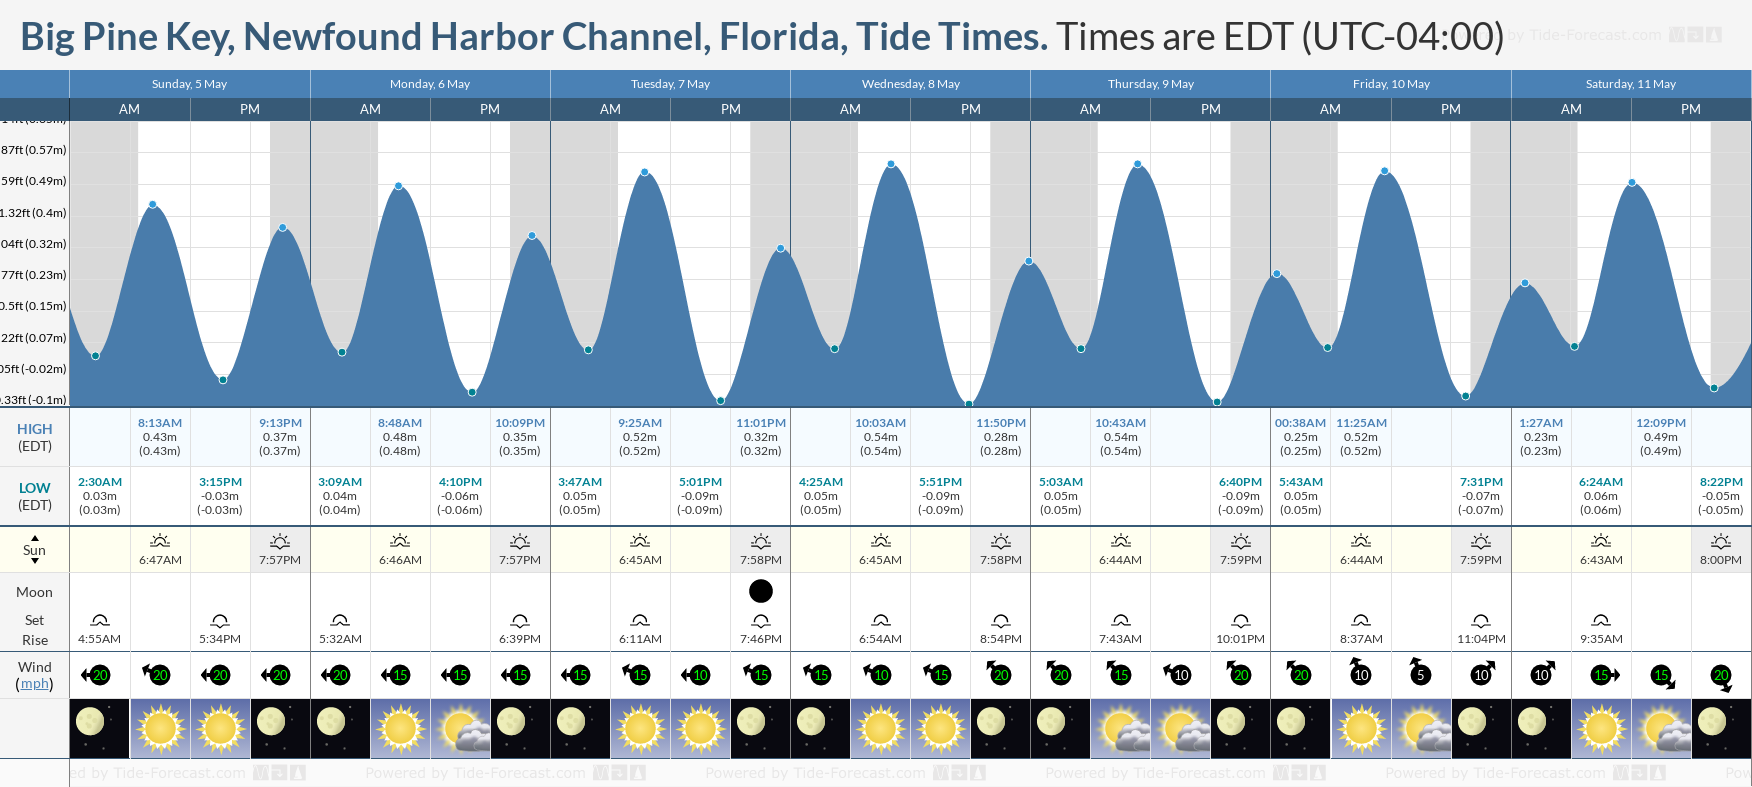 Big Pine Key, Newfound Harbor Channel, Florida Tide Chart including high and low tide times for the next 7 days